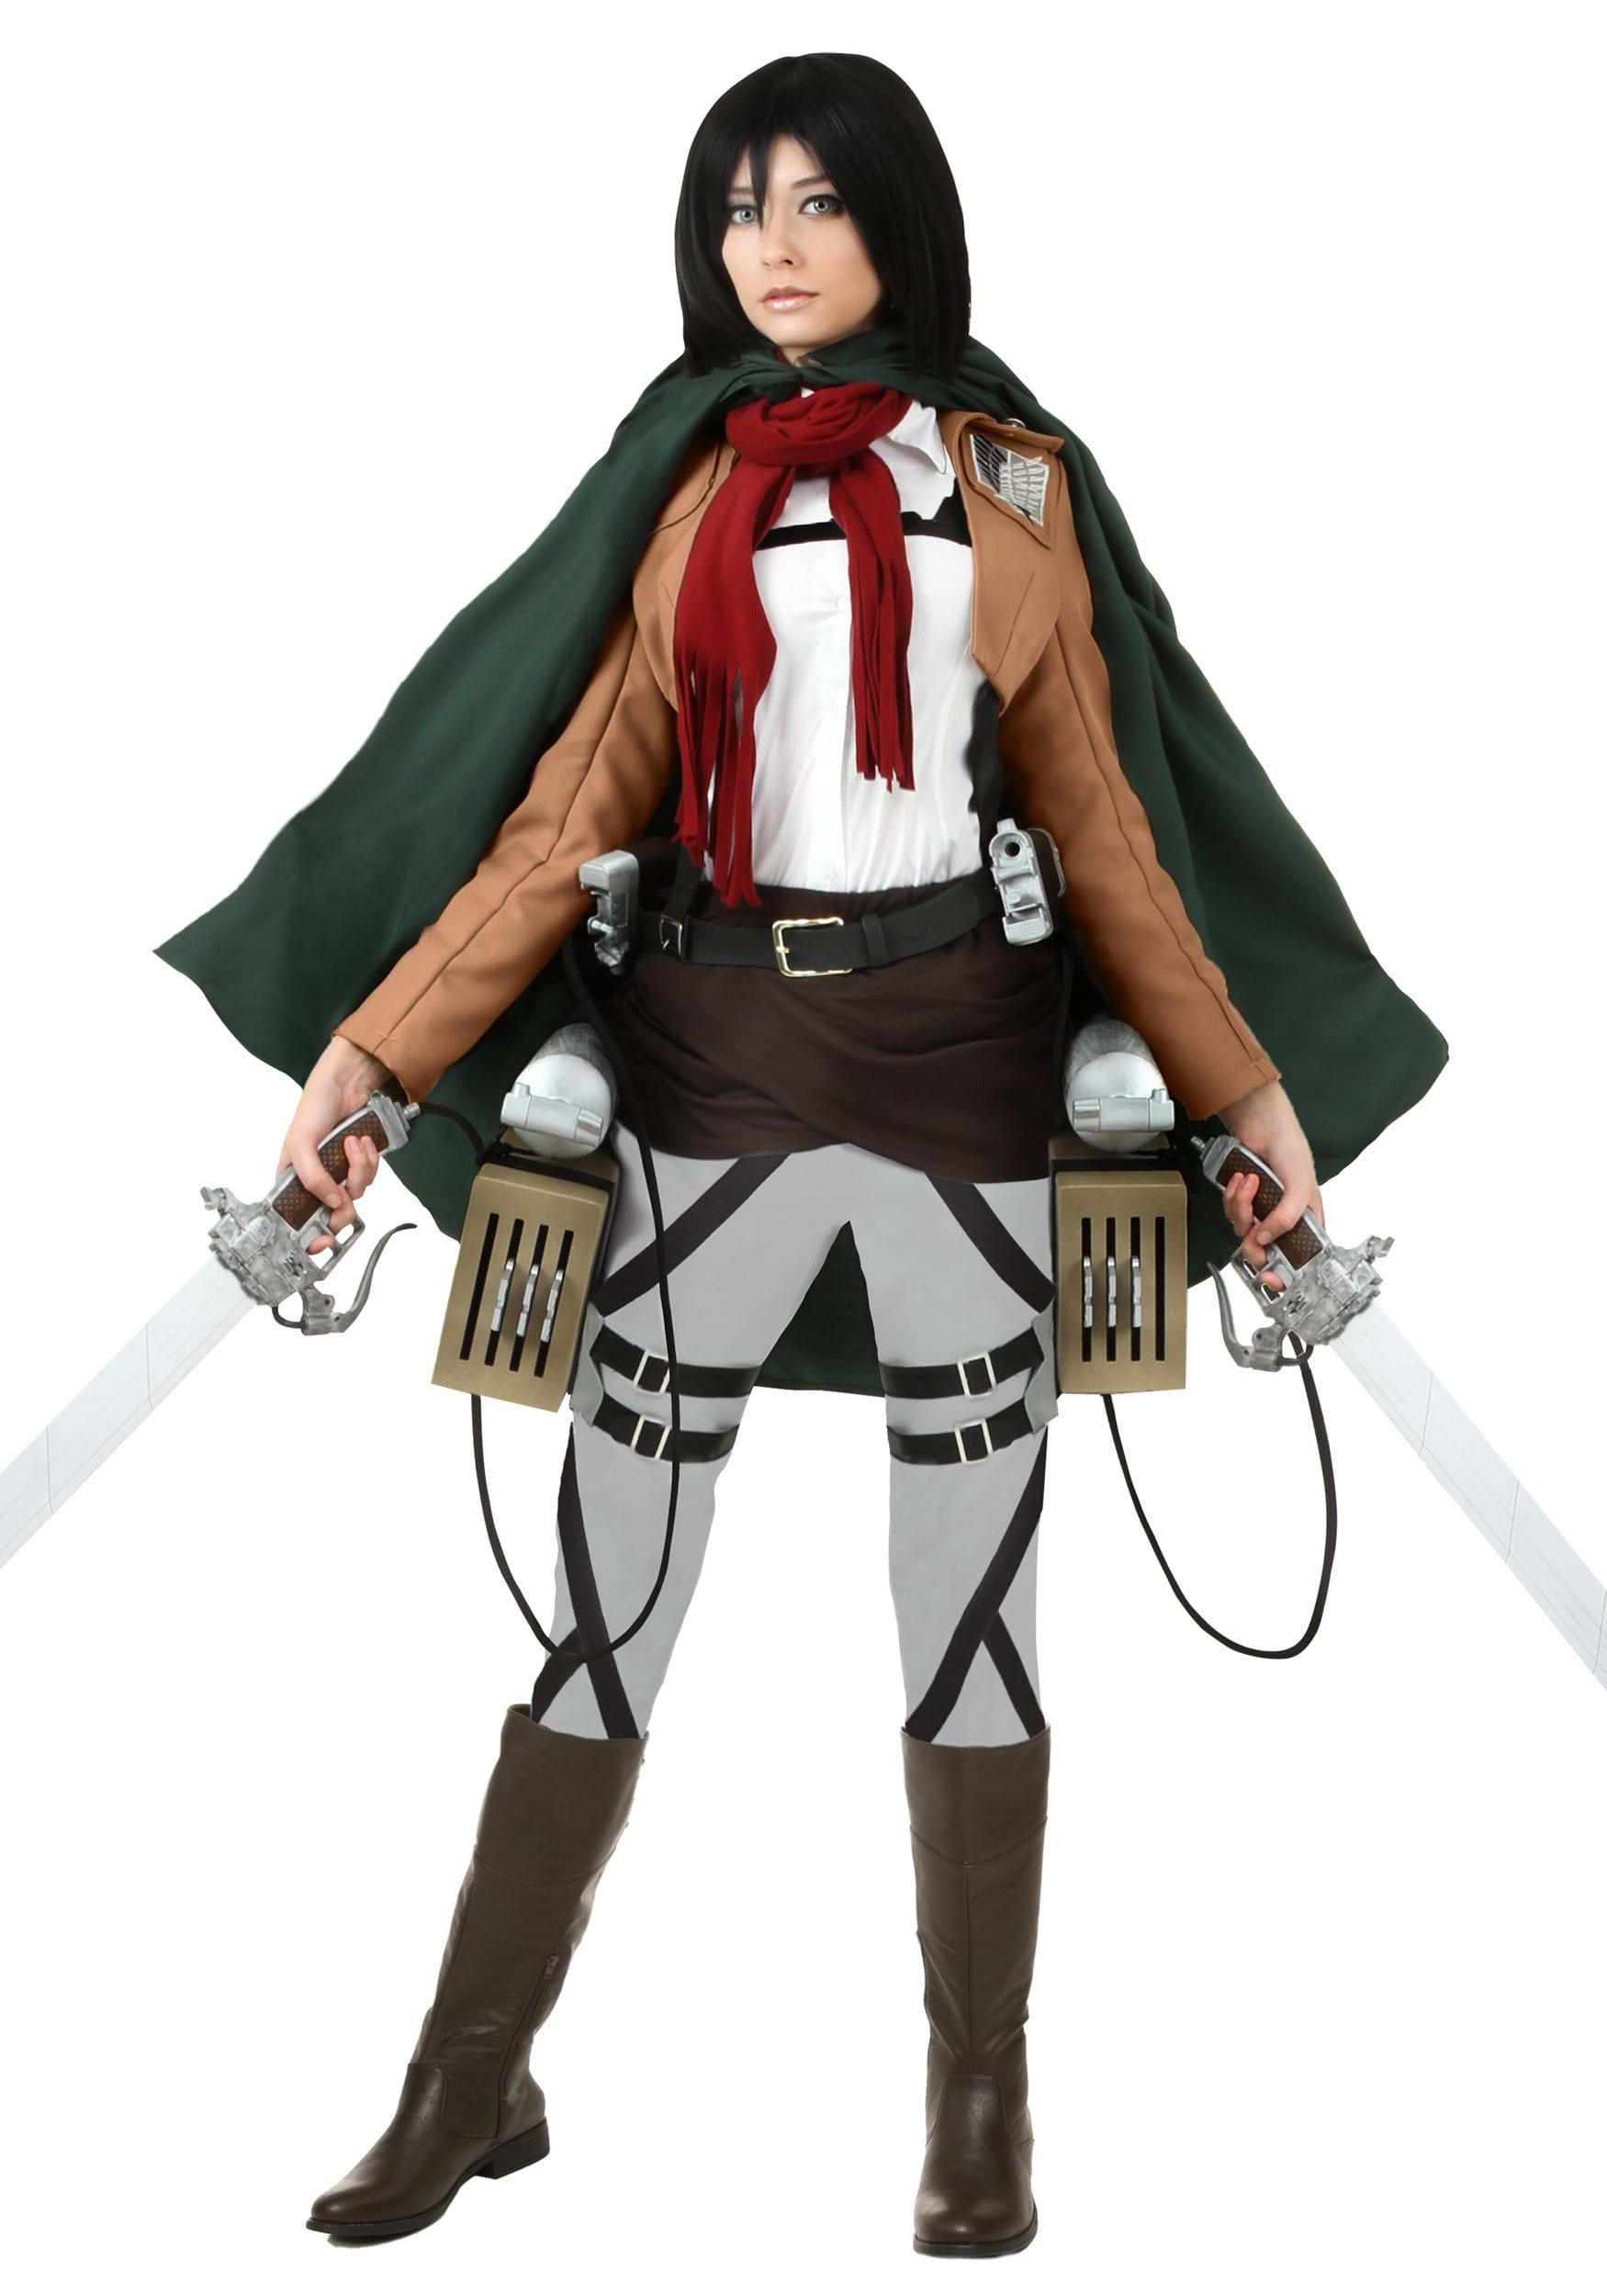 Image of FUN Costumes Attack on TItan Deluxe Mikasa Costume | Attack on Titan Costumes